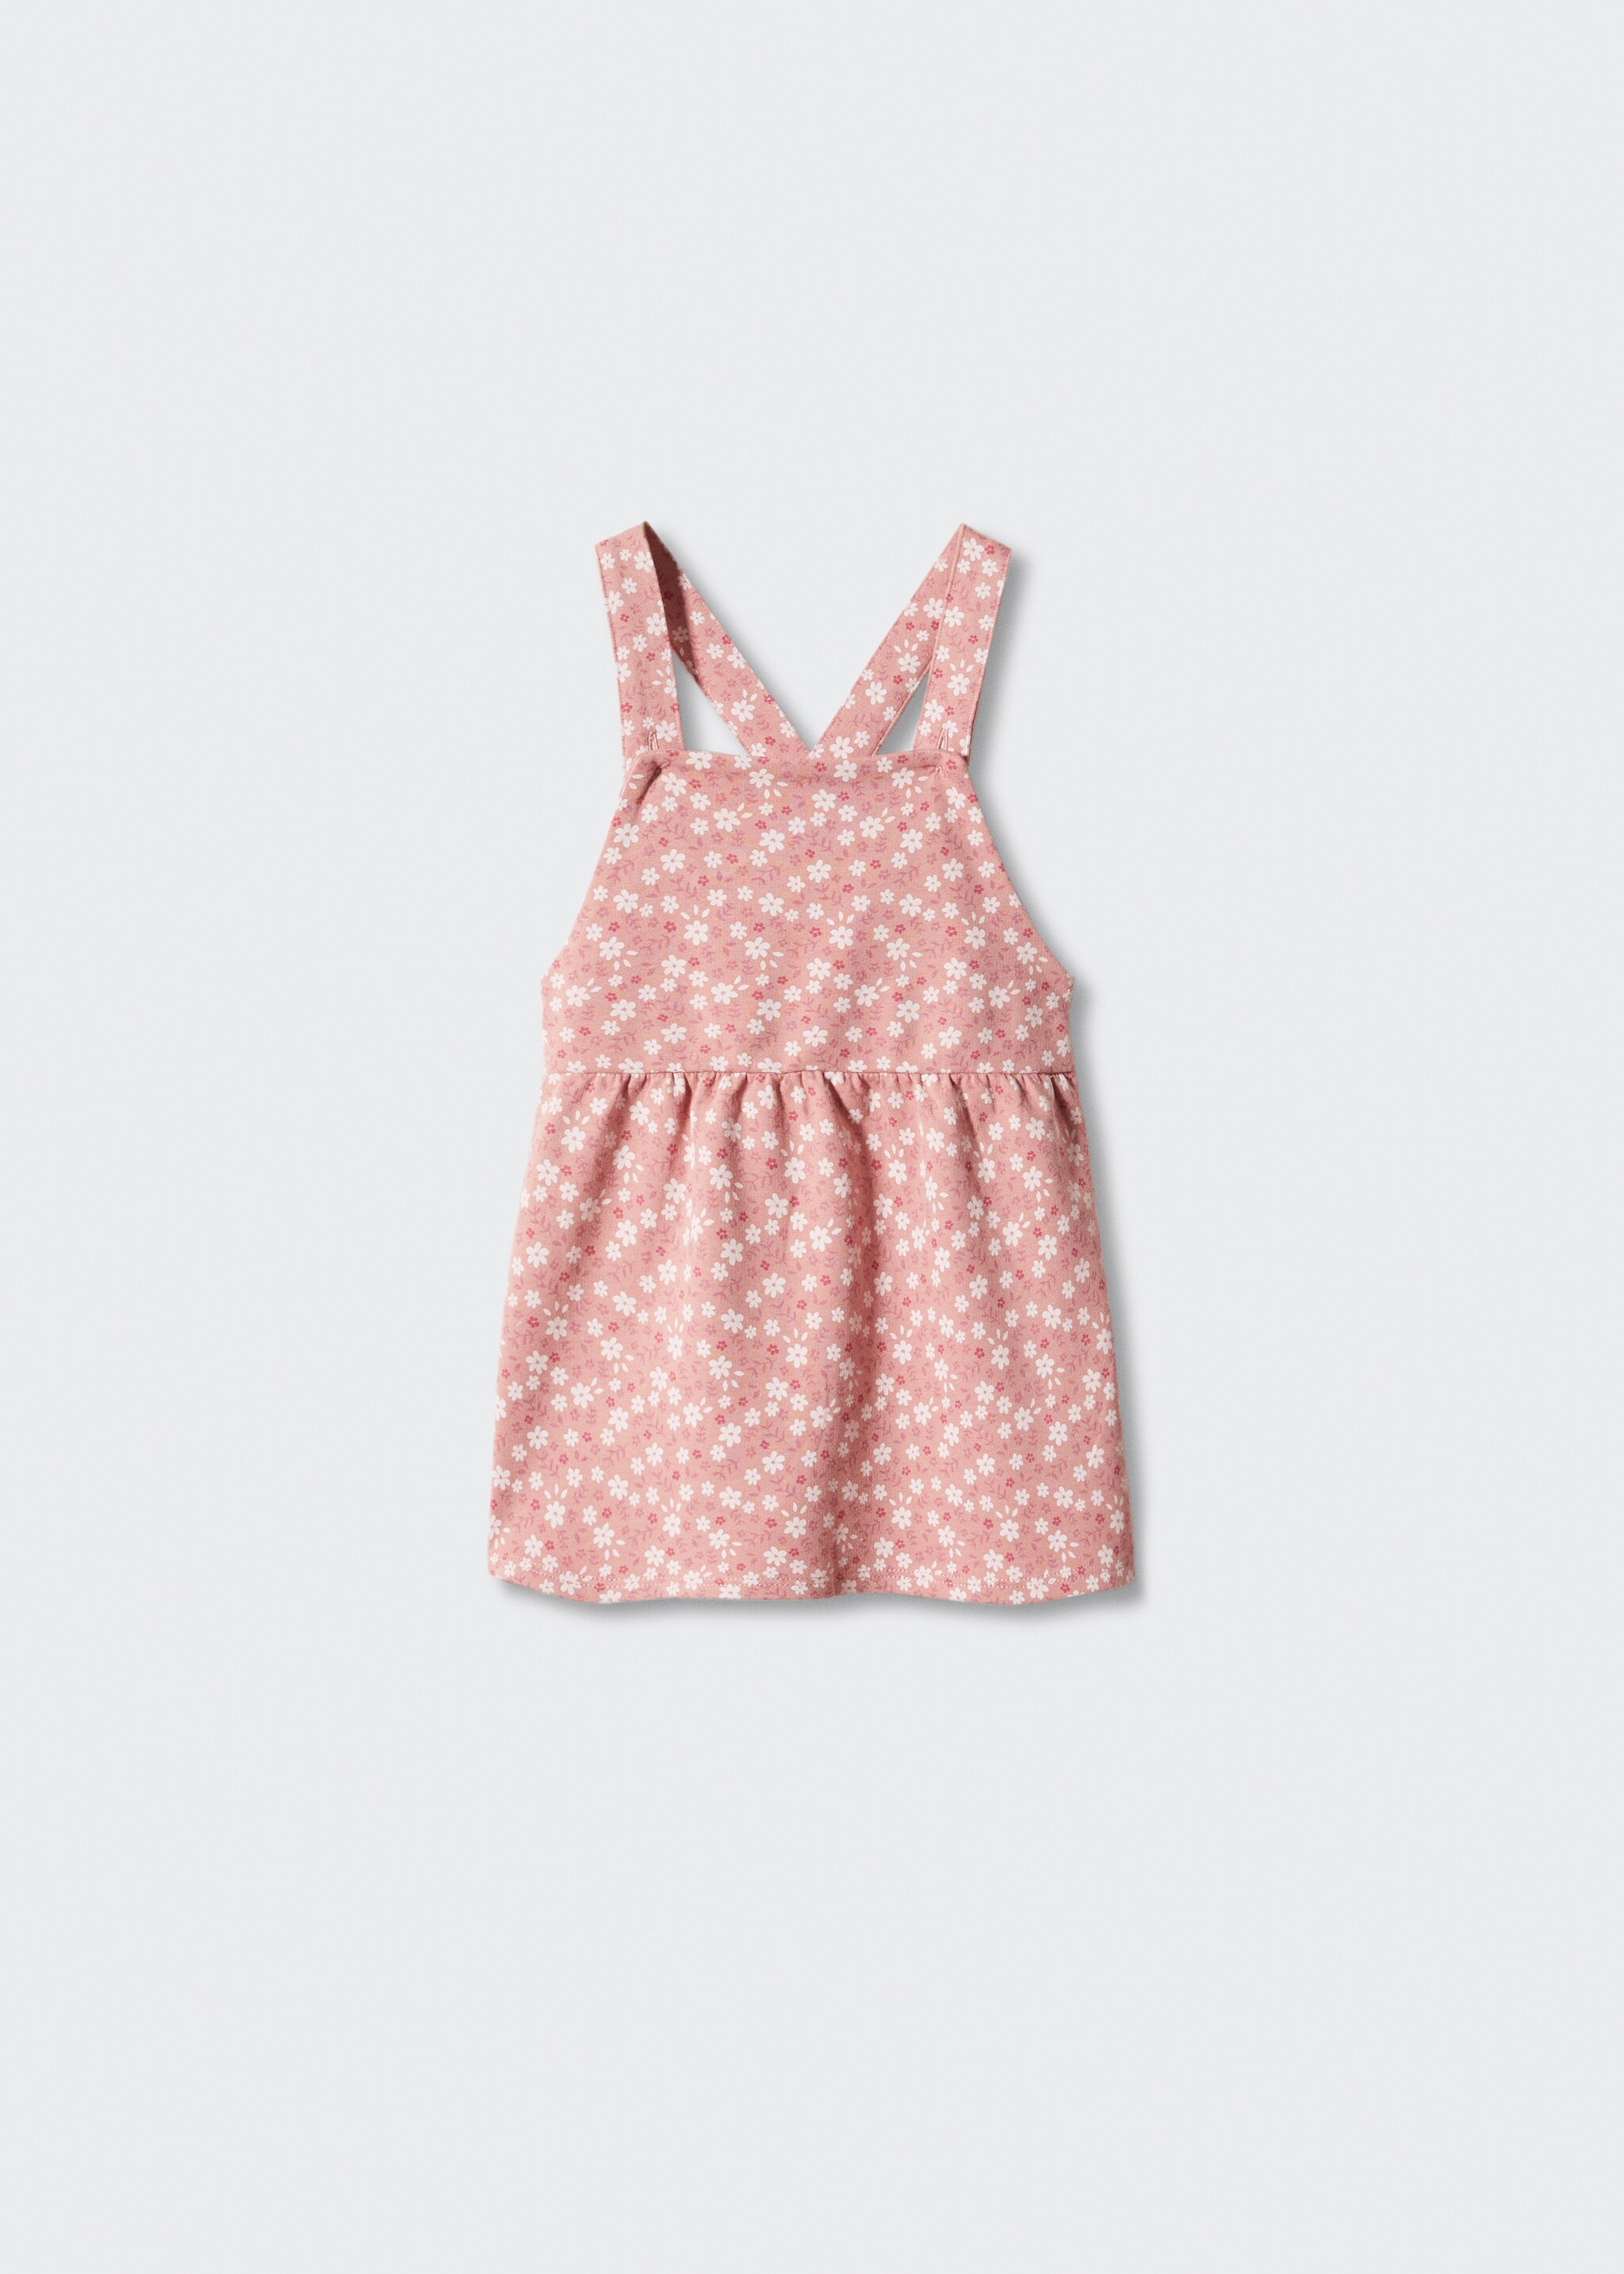 Floral cotton pinafore dress - Article without model